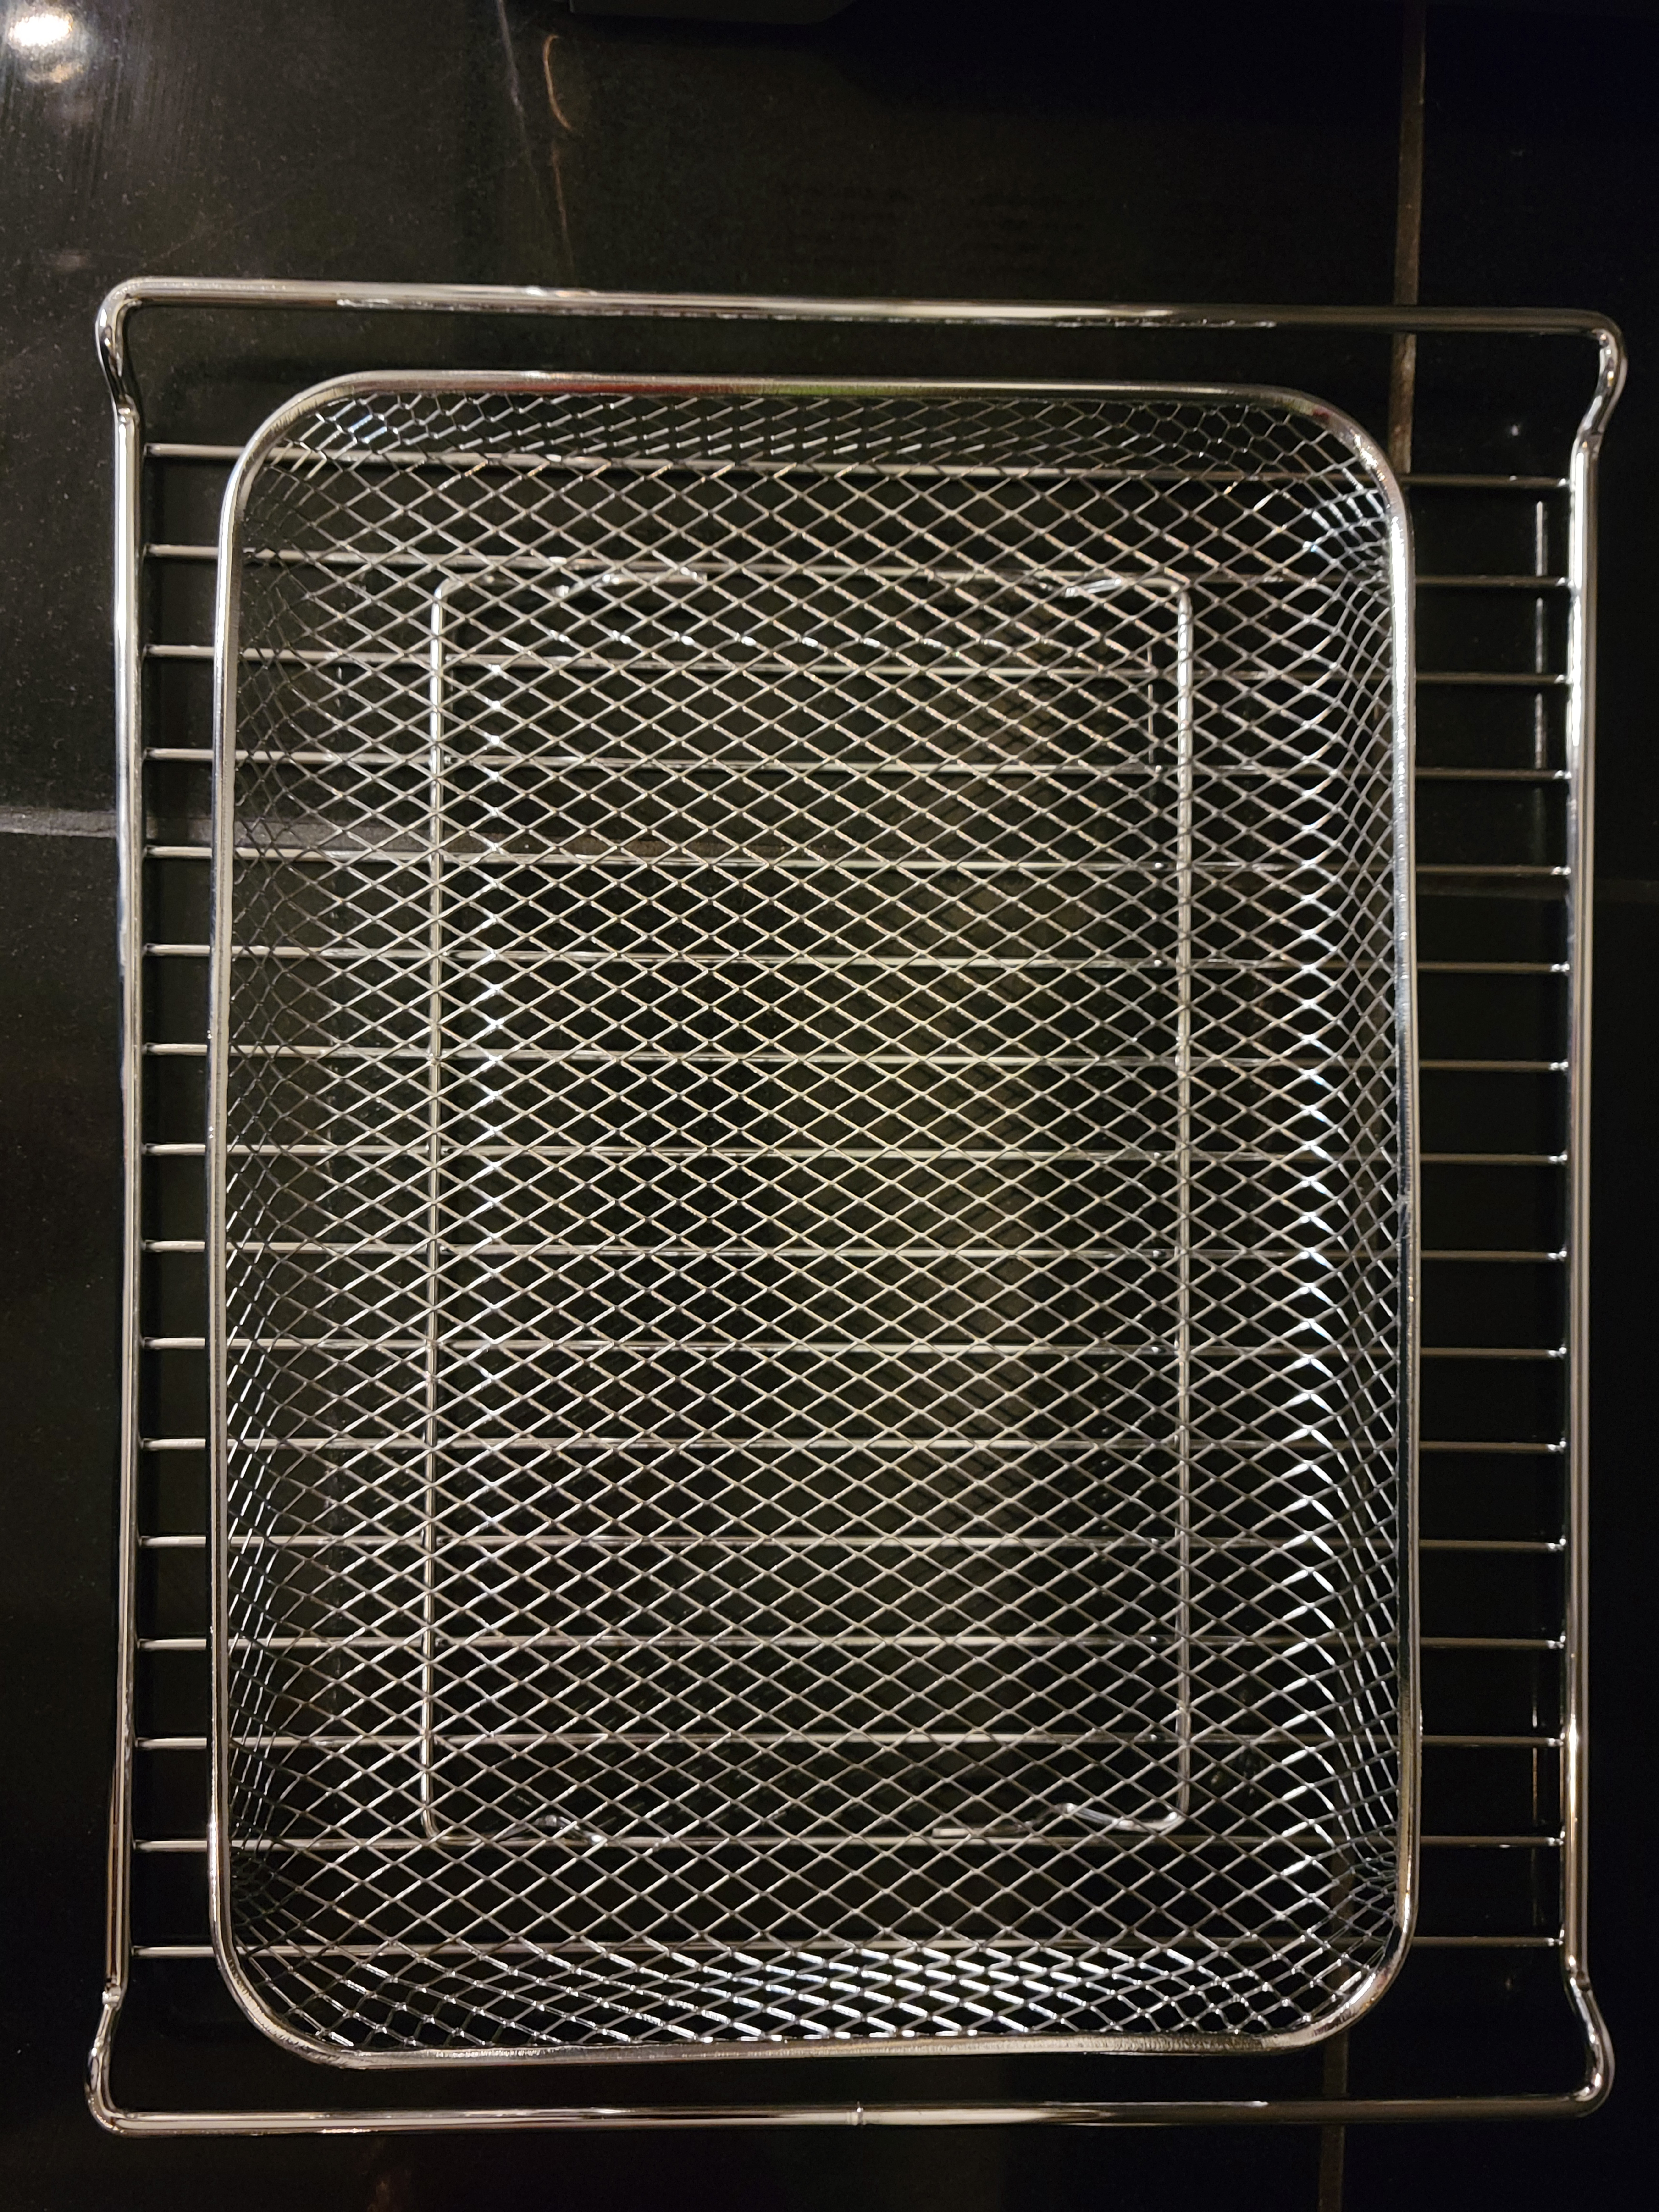 Top view of the included wire racks and basket of the Instant Pot Omni